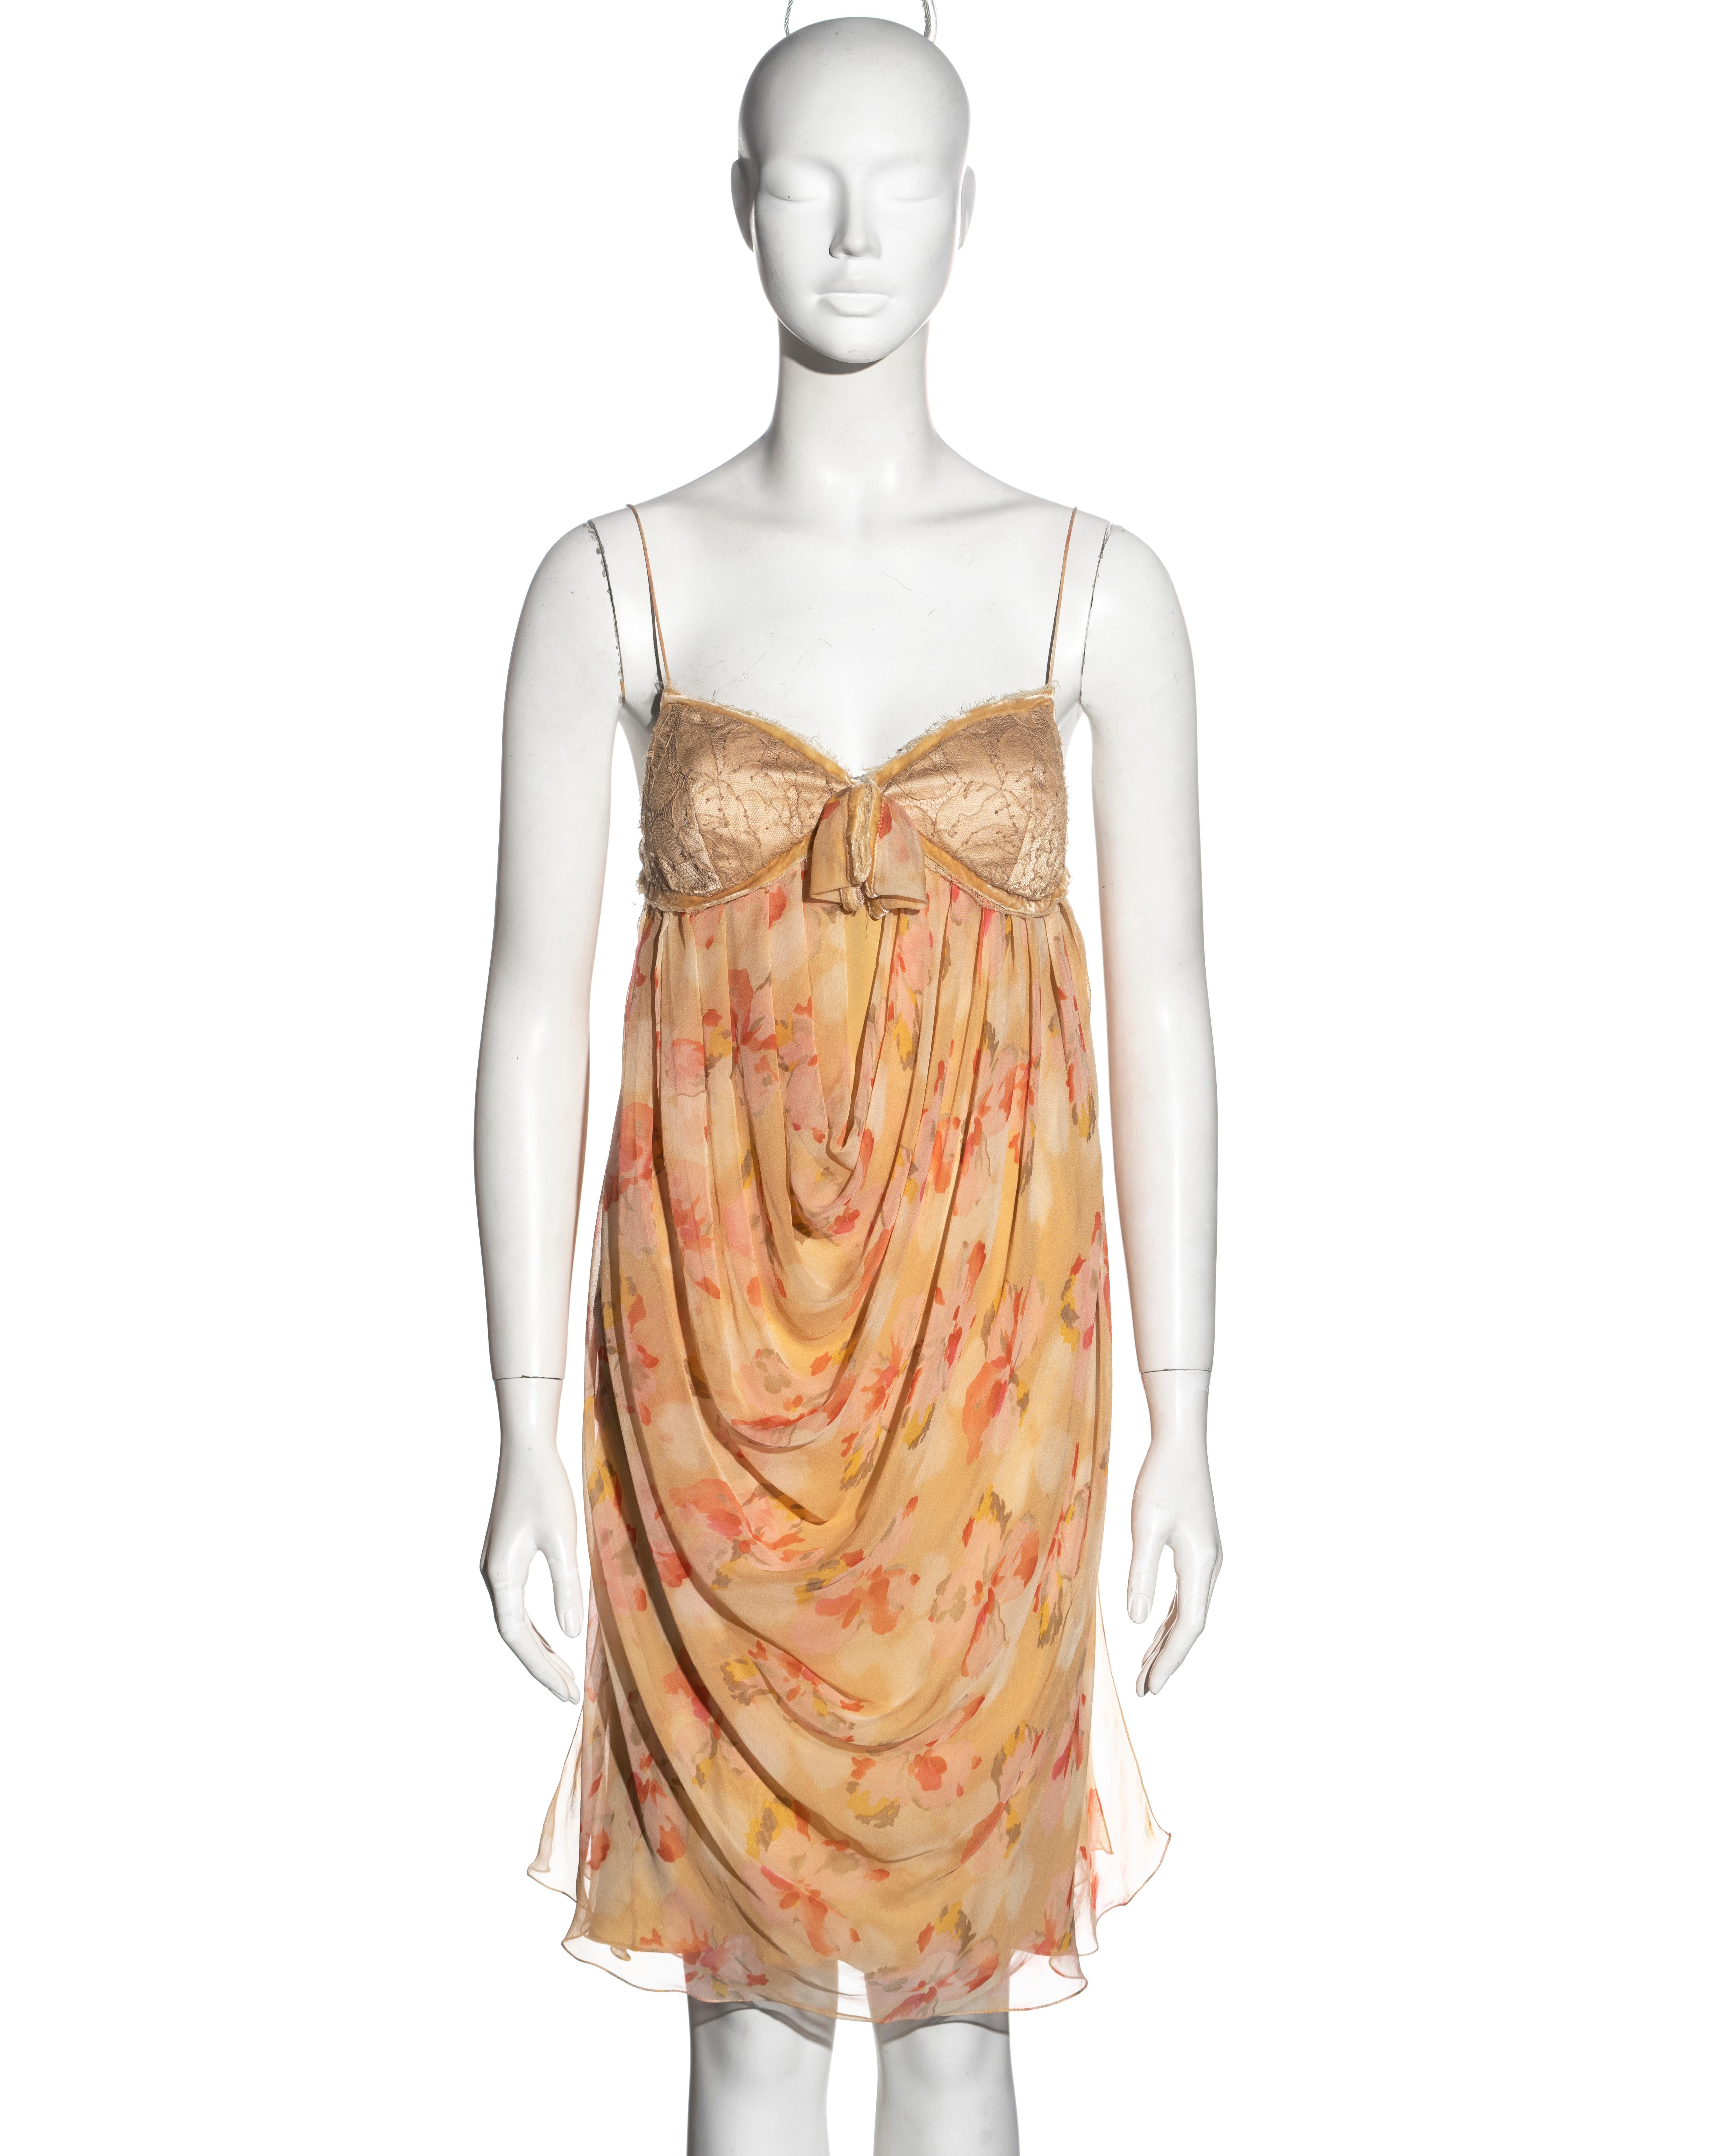 ▪ Christian Dior dress
▪ Designed by John Galliano
▪ Apricot floral printed silk chiffon 
▪ Velvet trim 
▪ Lace bust 
▪ Draped skirt 
▪ Spaghetti straps
▪ Fabric buttons at the side opening 
▪ Silk lining 
▪ FR 40 - UK 12 - US 8
▪ Fall-Winter 2005
▪